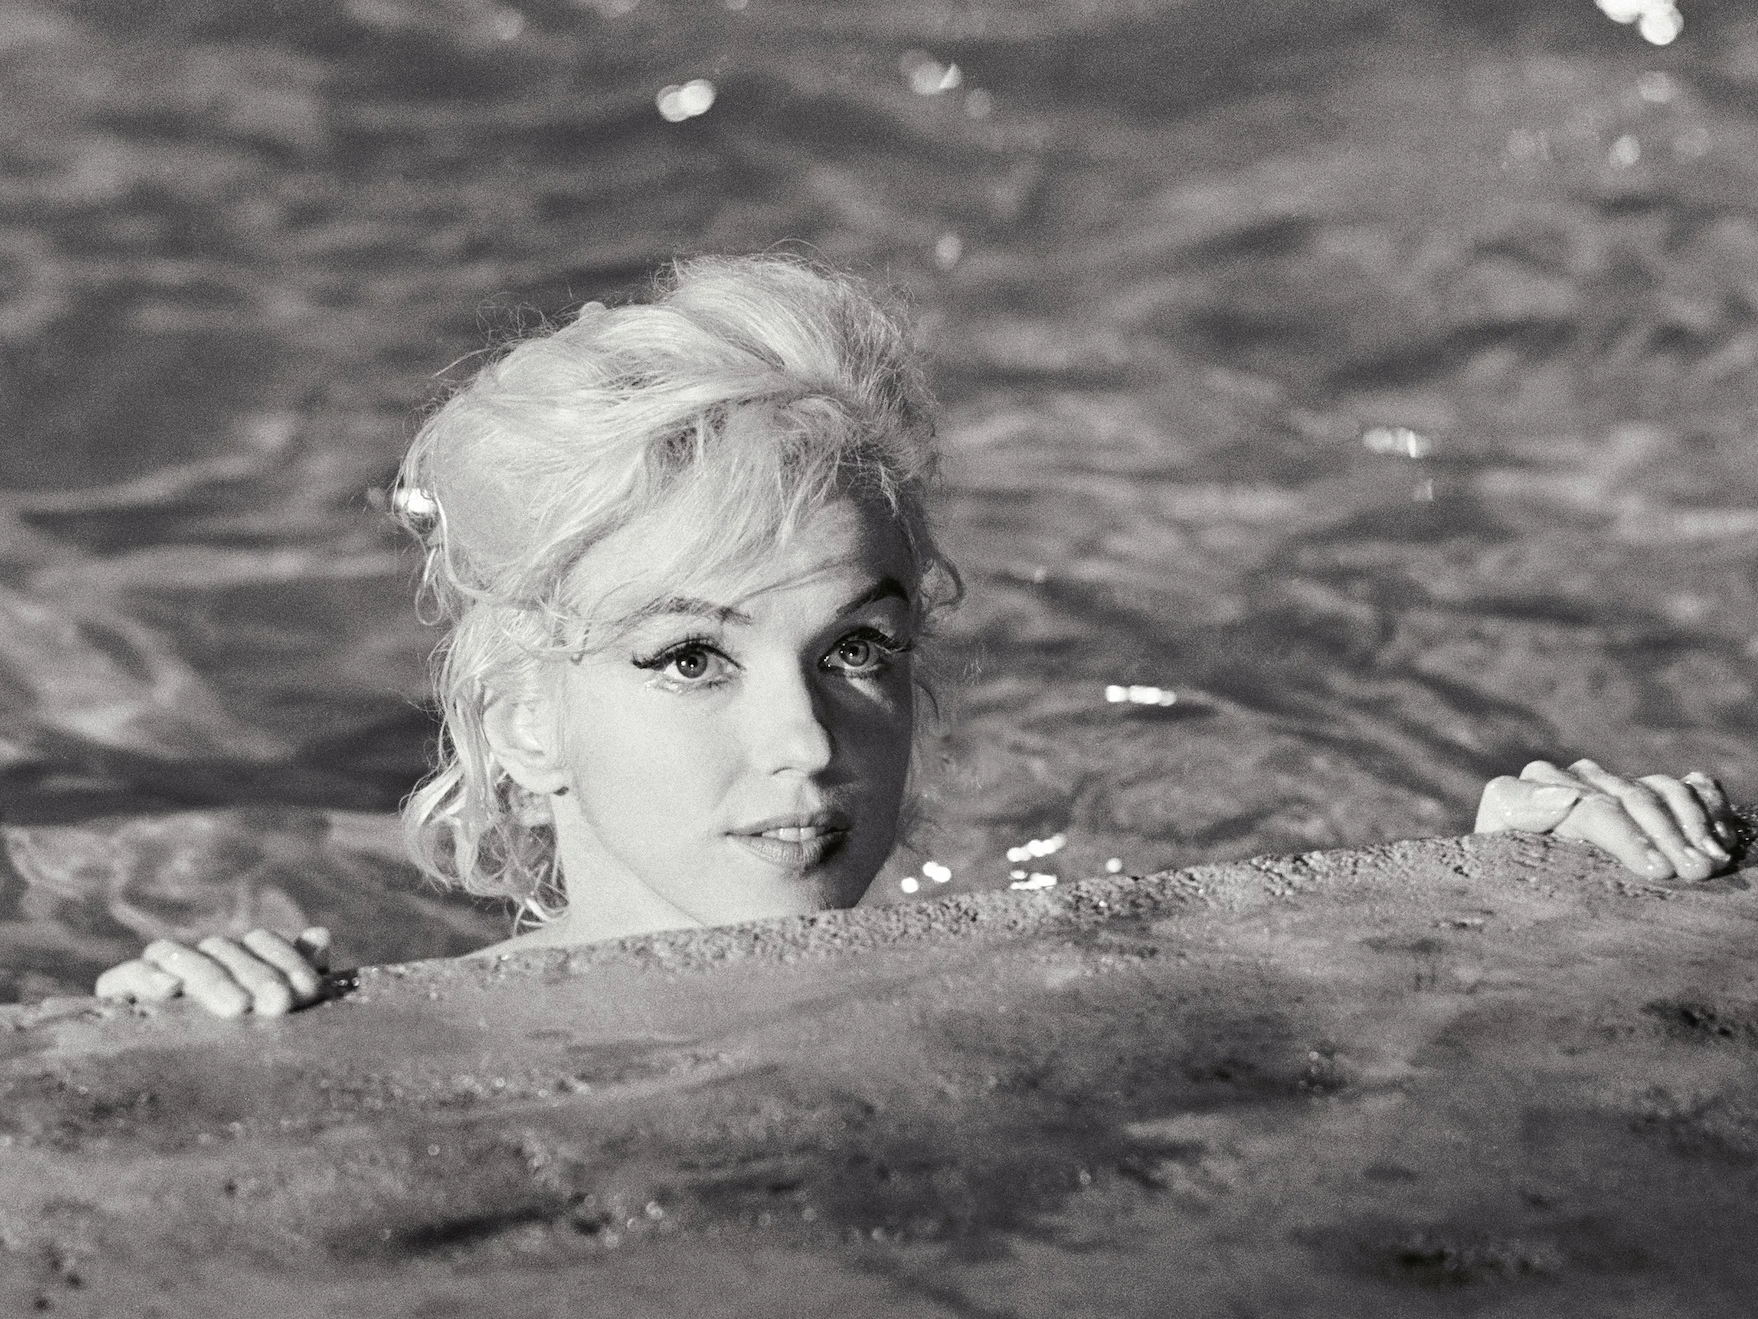 Marilyn Monroe close up in pool (black and white) 1962